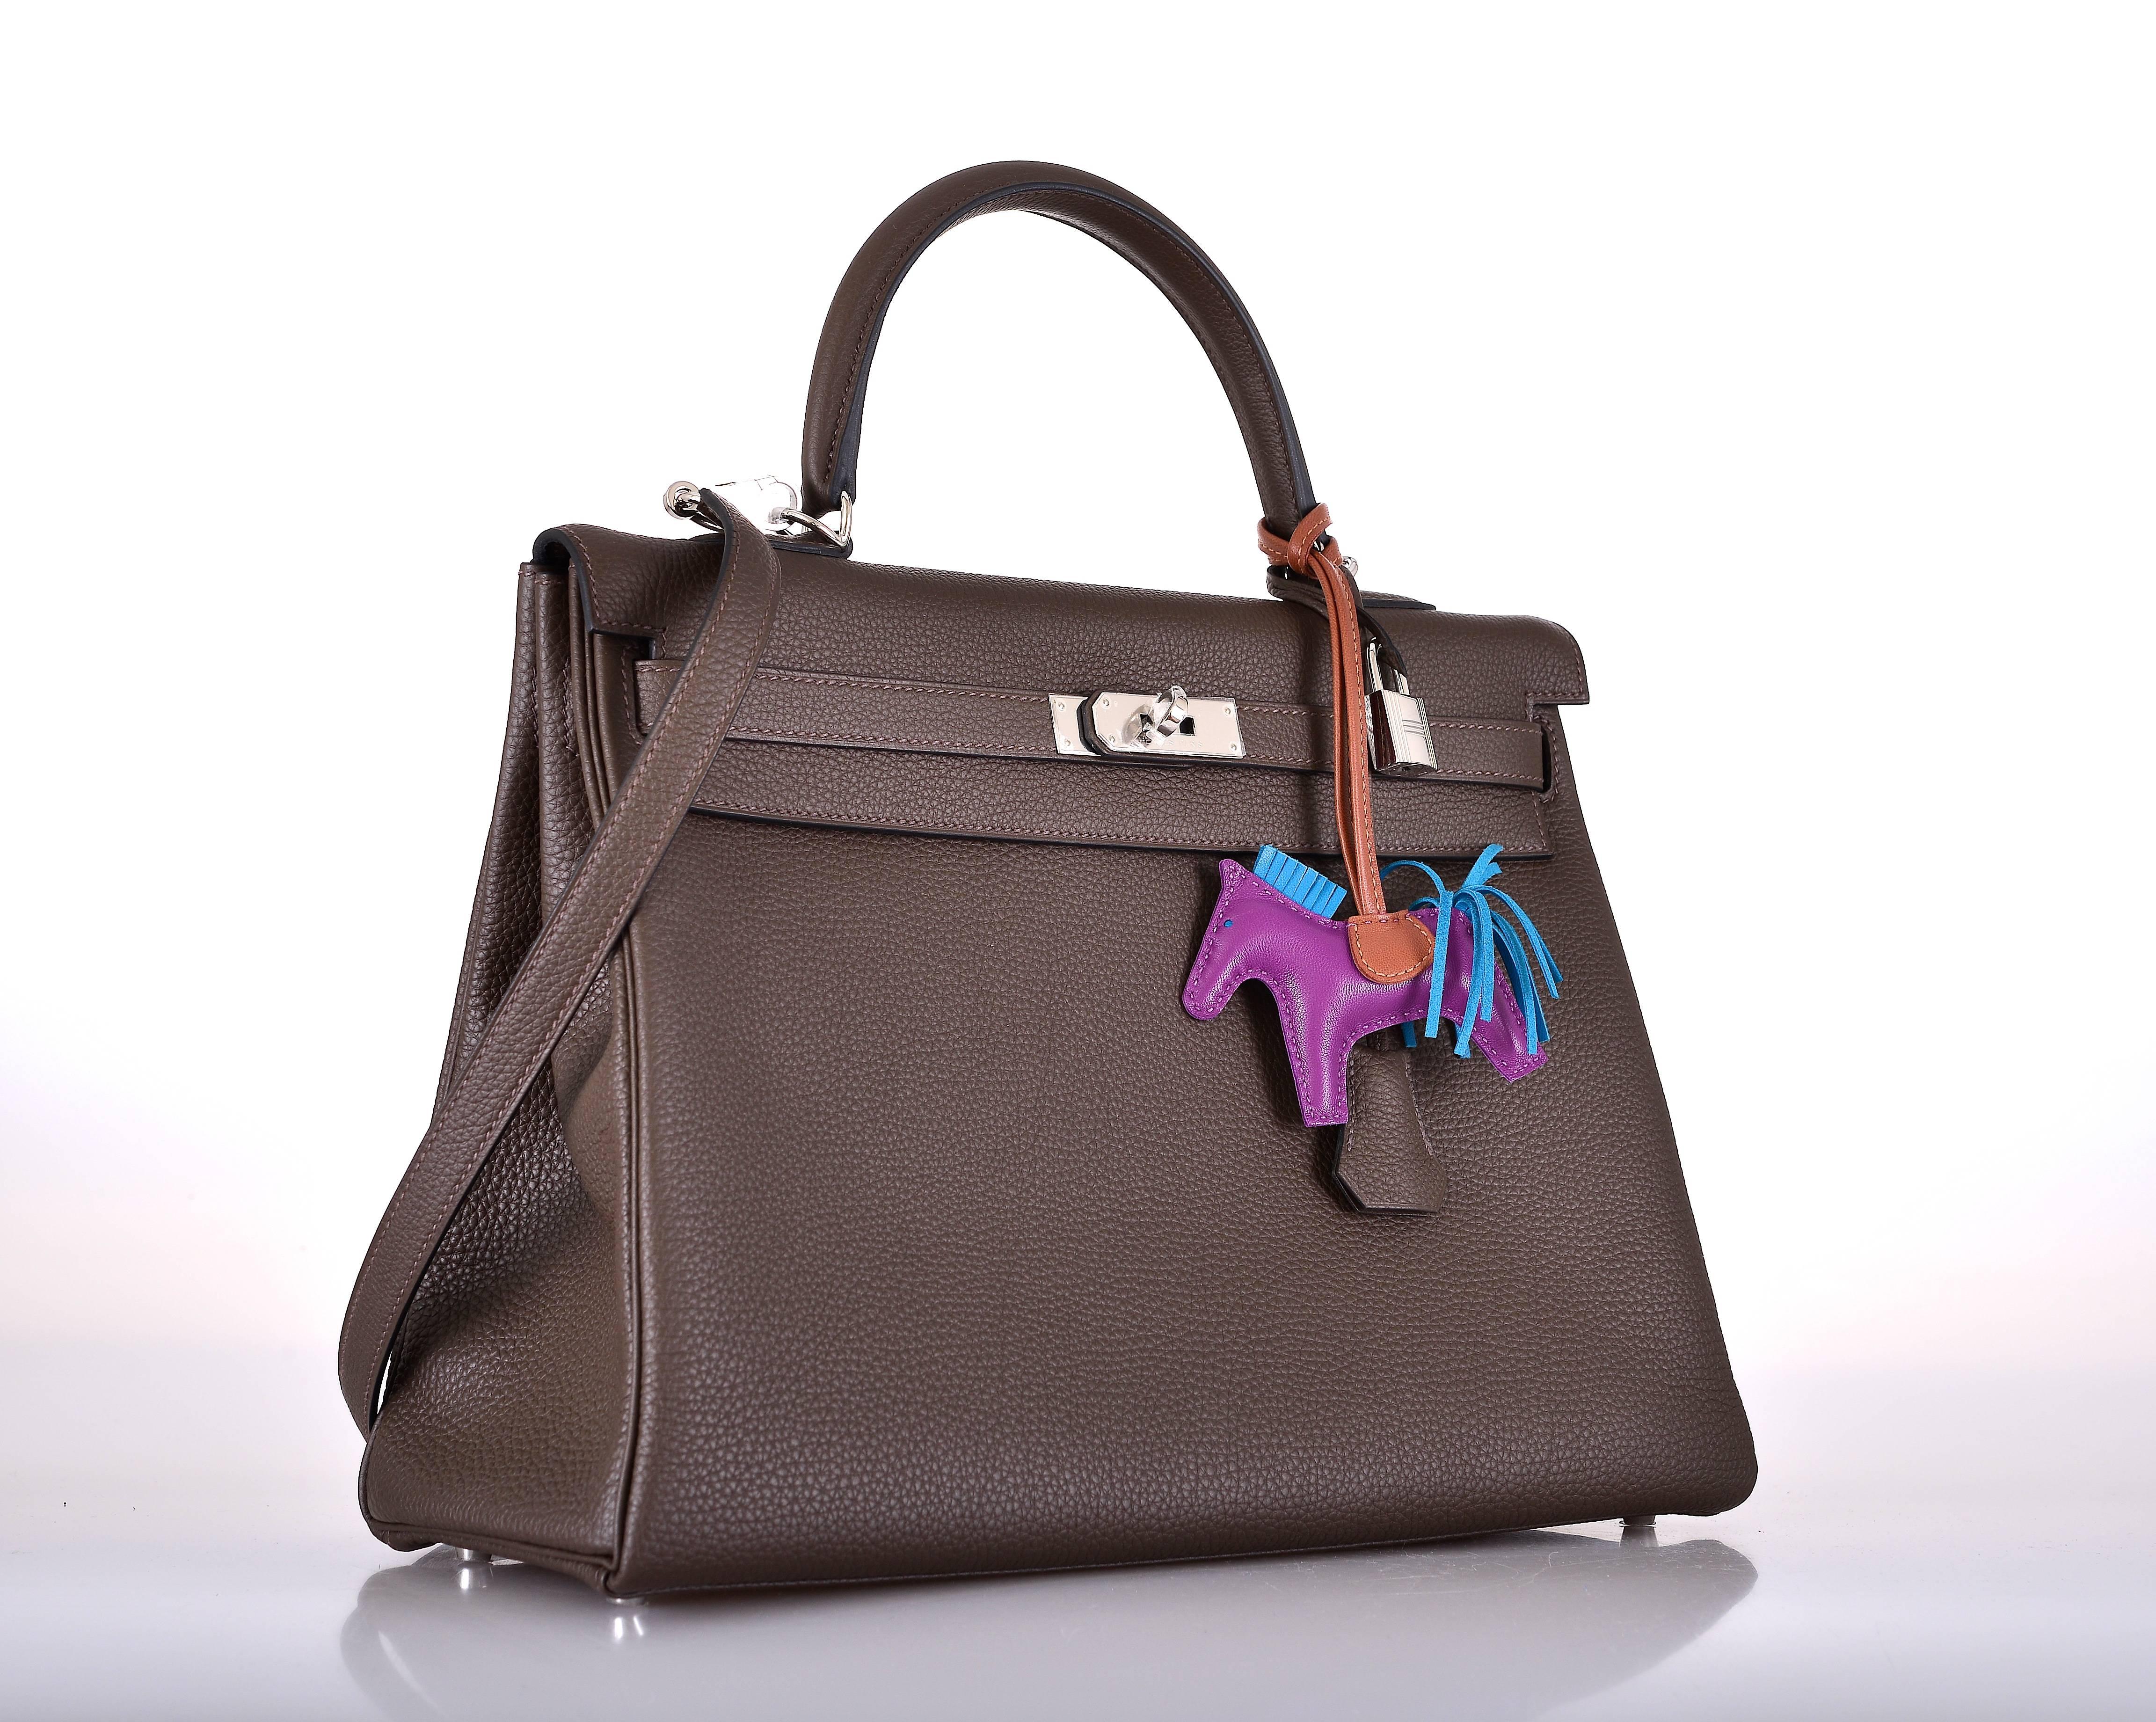 As always, another one of my incredible finds. This color is classic and forever in style!

Gorgeous 35cm new color Ecorce Togo leather Kelly with Chevre interior and palladium hardware.

Here is your chance to grab this bag! Absolutely new!